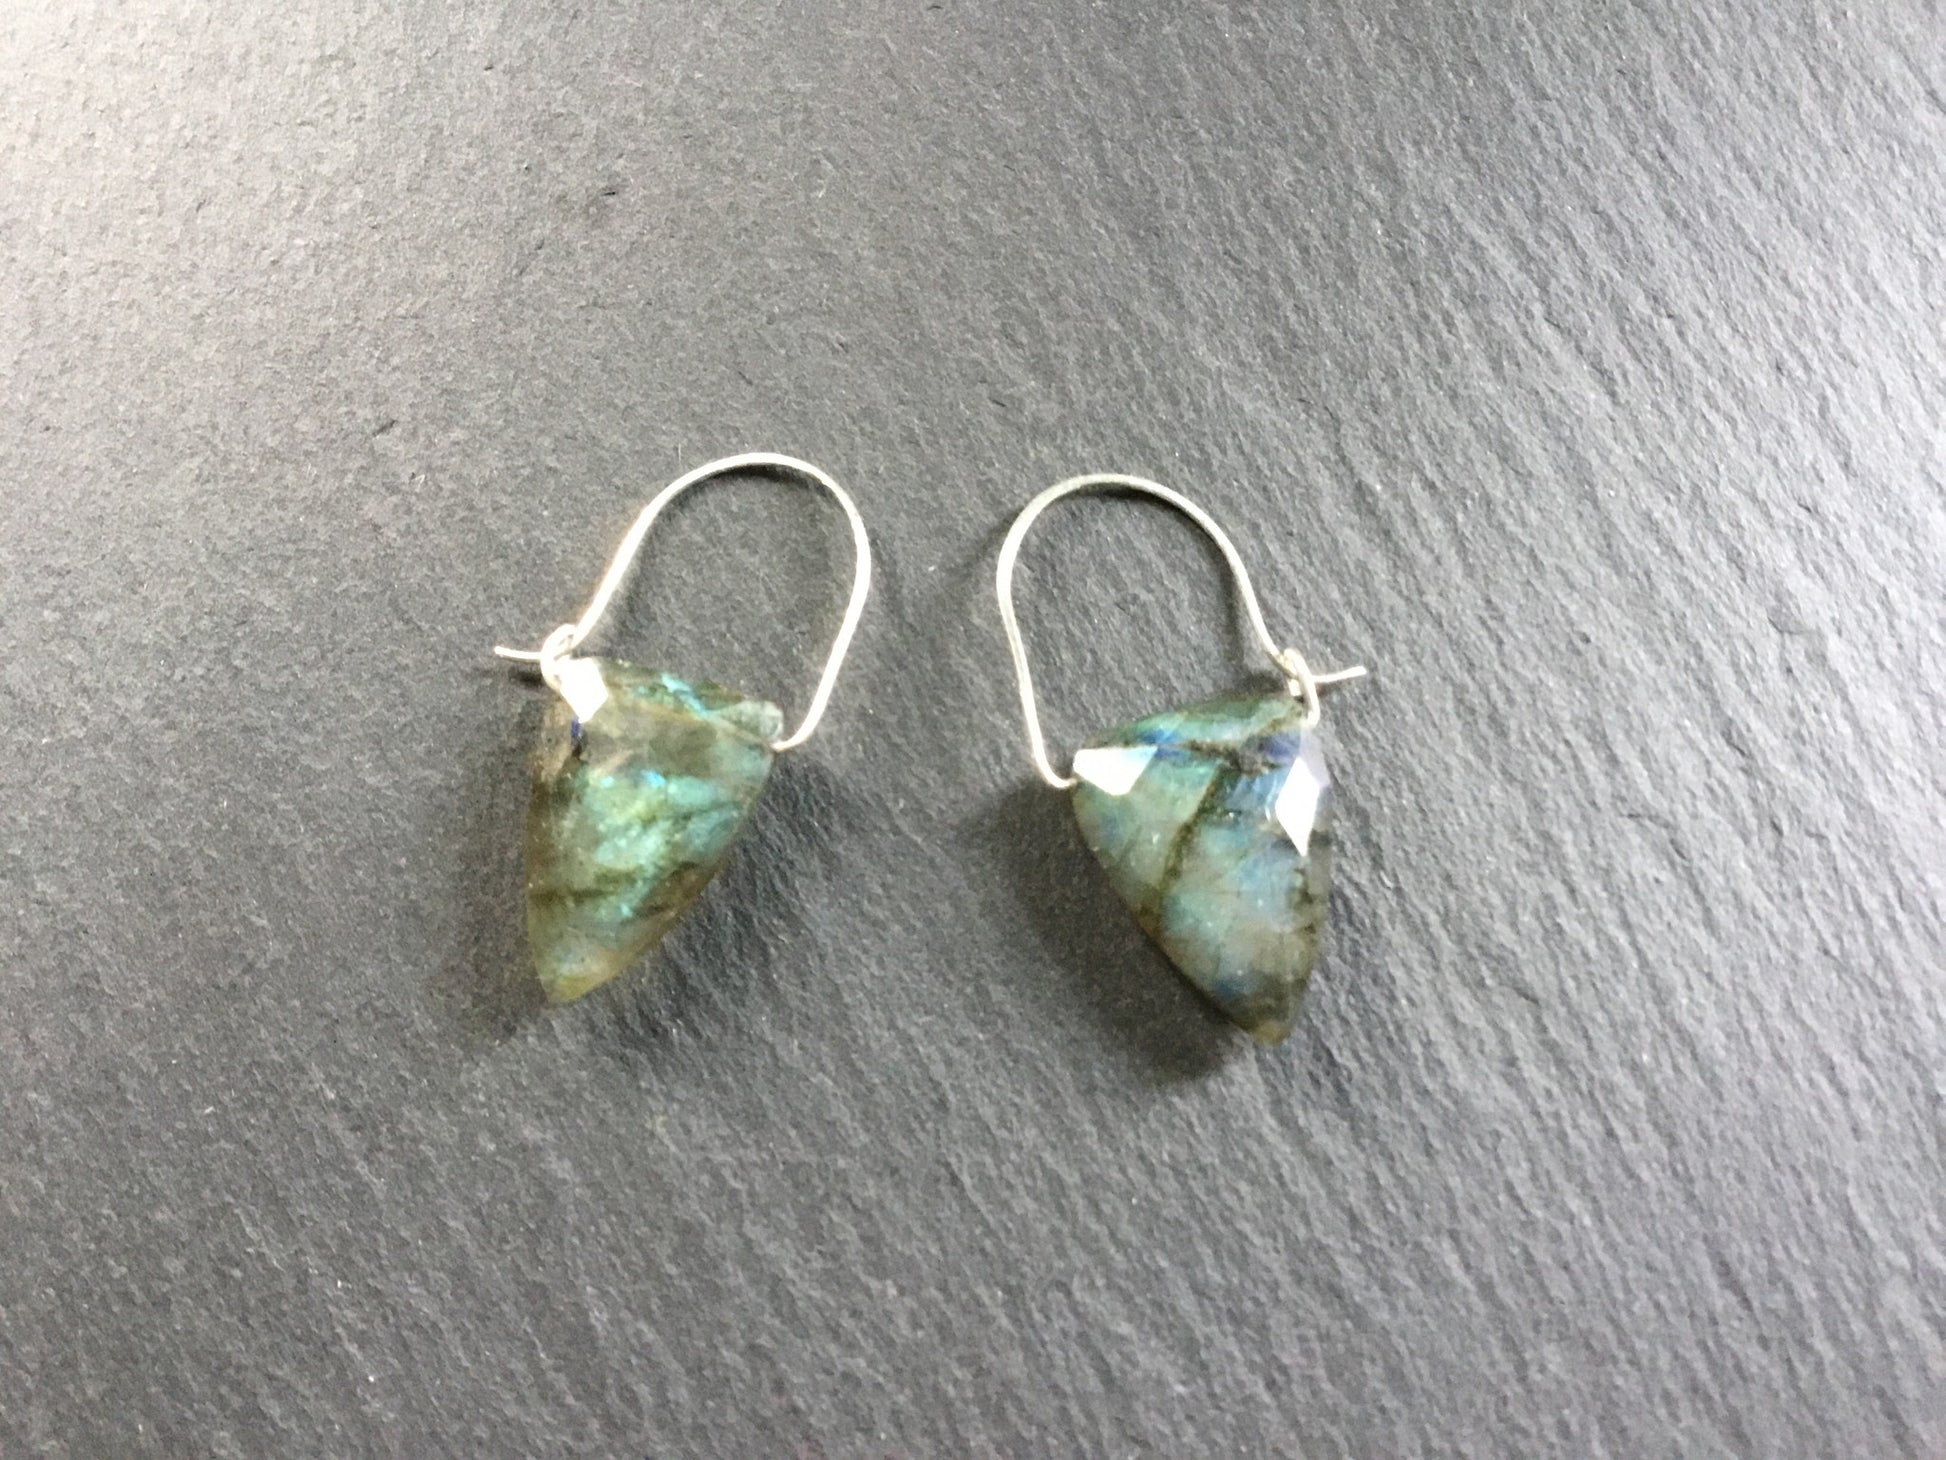 ***Labradorite "Tooth" Earrings. All Sterling Silver Hand Forged Hoop Ear-wires. Labradorite Irregular Faceted Triangles. - Darkmoon Fayre